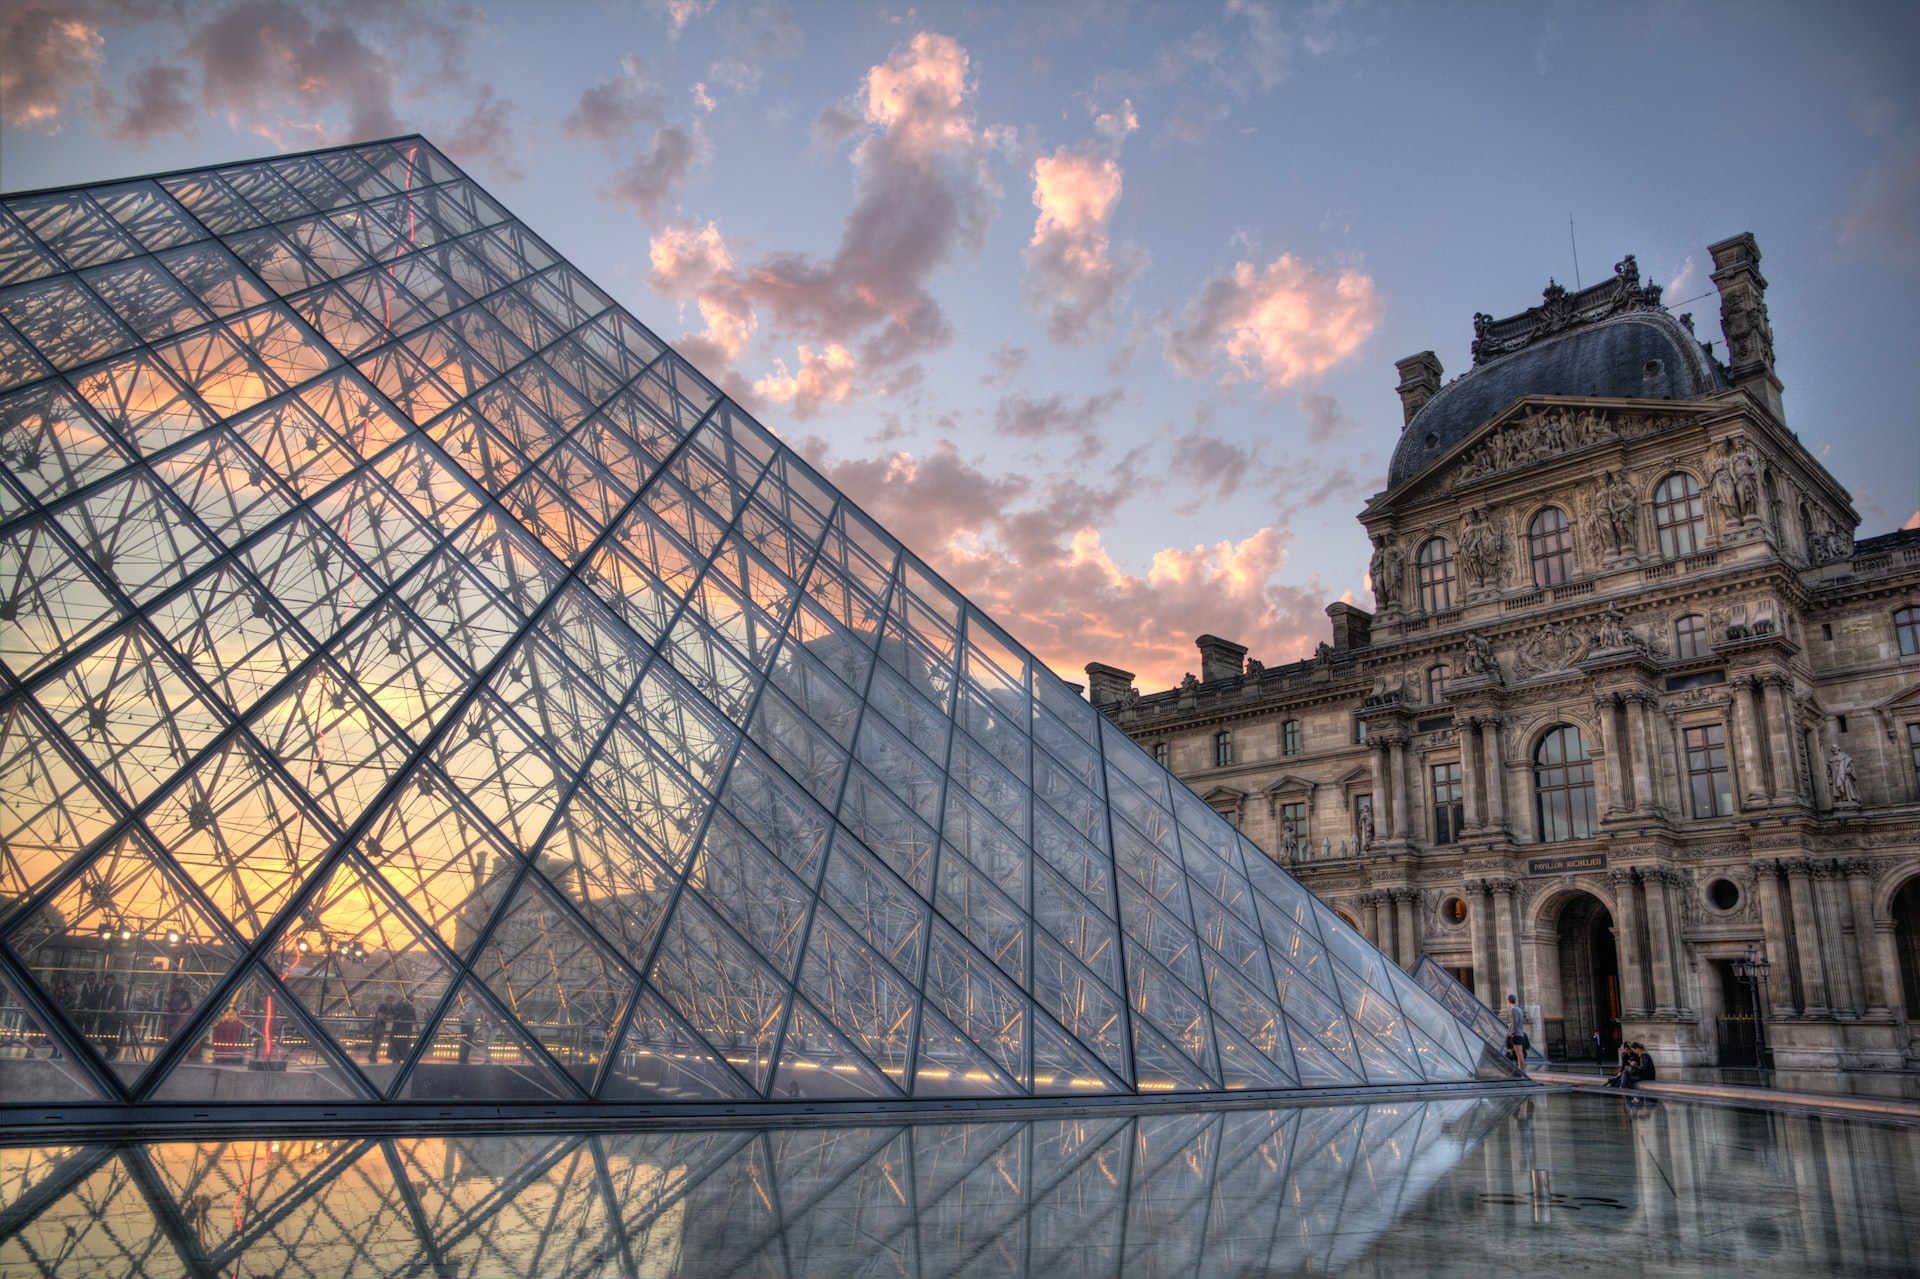 The Louvre museum in Paris on Rouvy